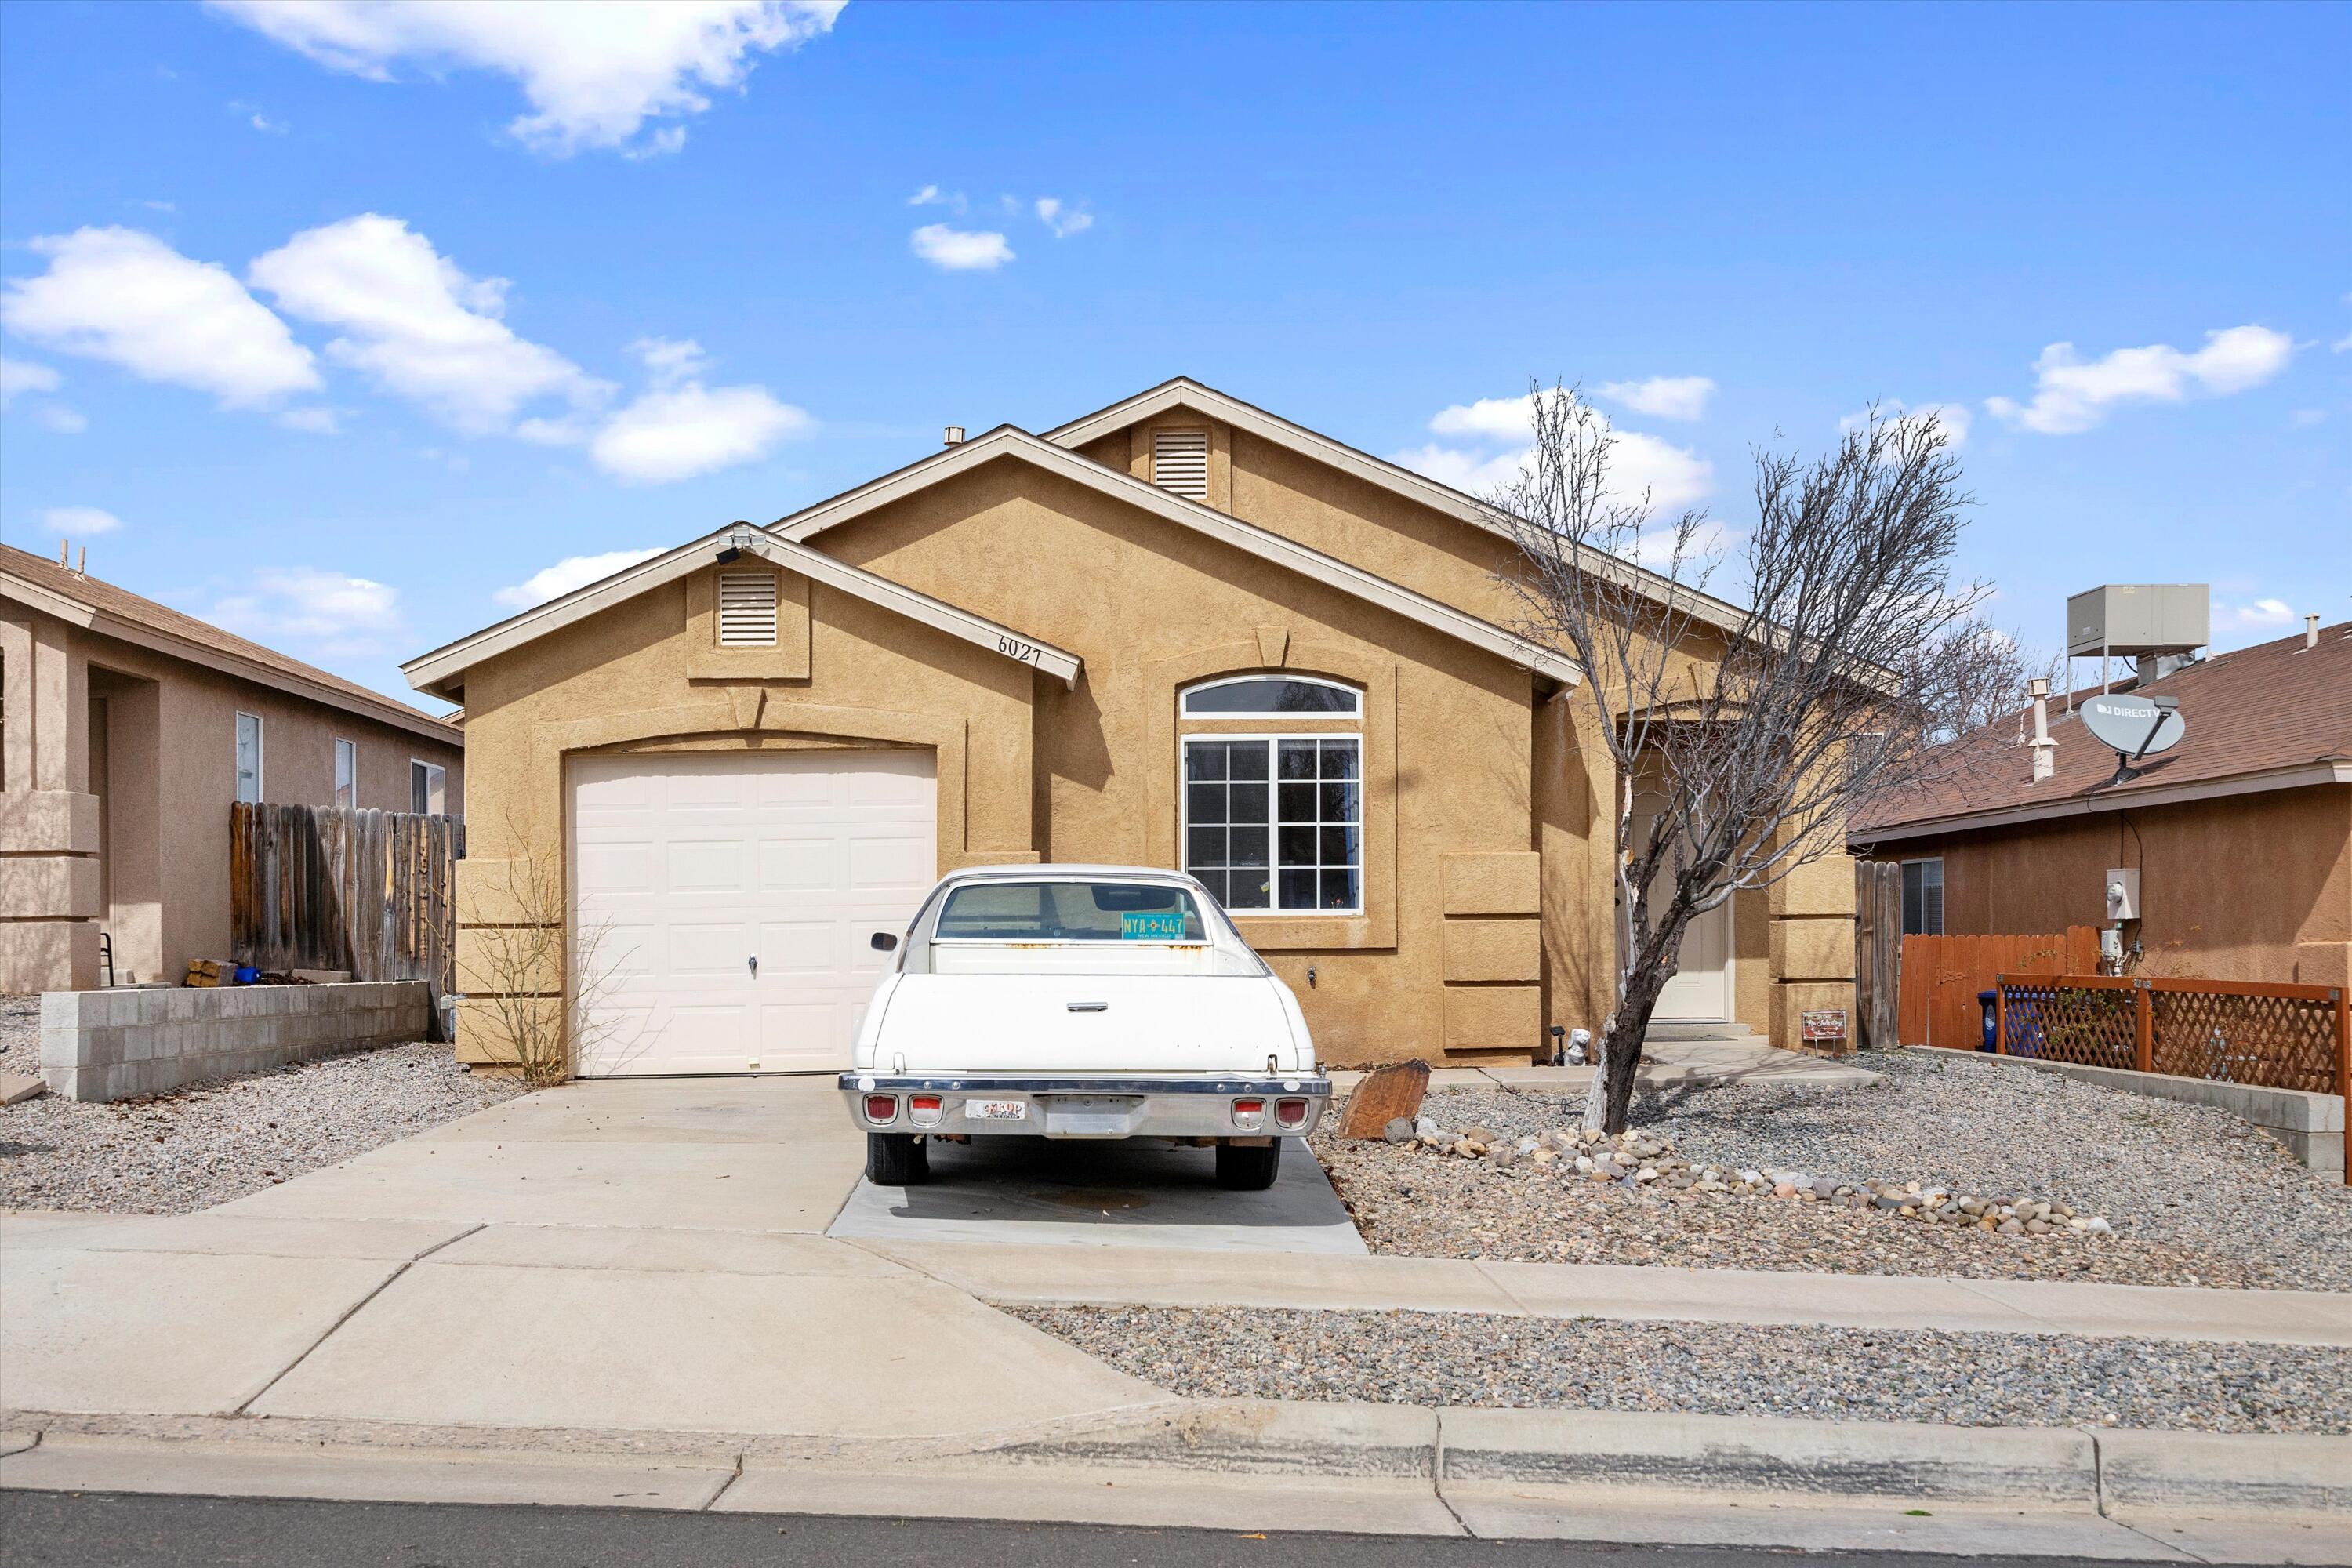 6027 Canis Avenue NW, Albuquerque, New Mexico 87114, 2 Bedrooms Bedrooms, ,1 BathroomBathrooms,Residential,For Sale,6027 Canis Avenue NW,1059606